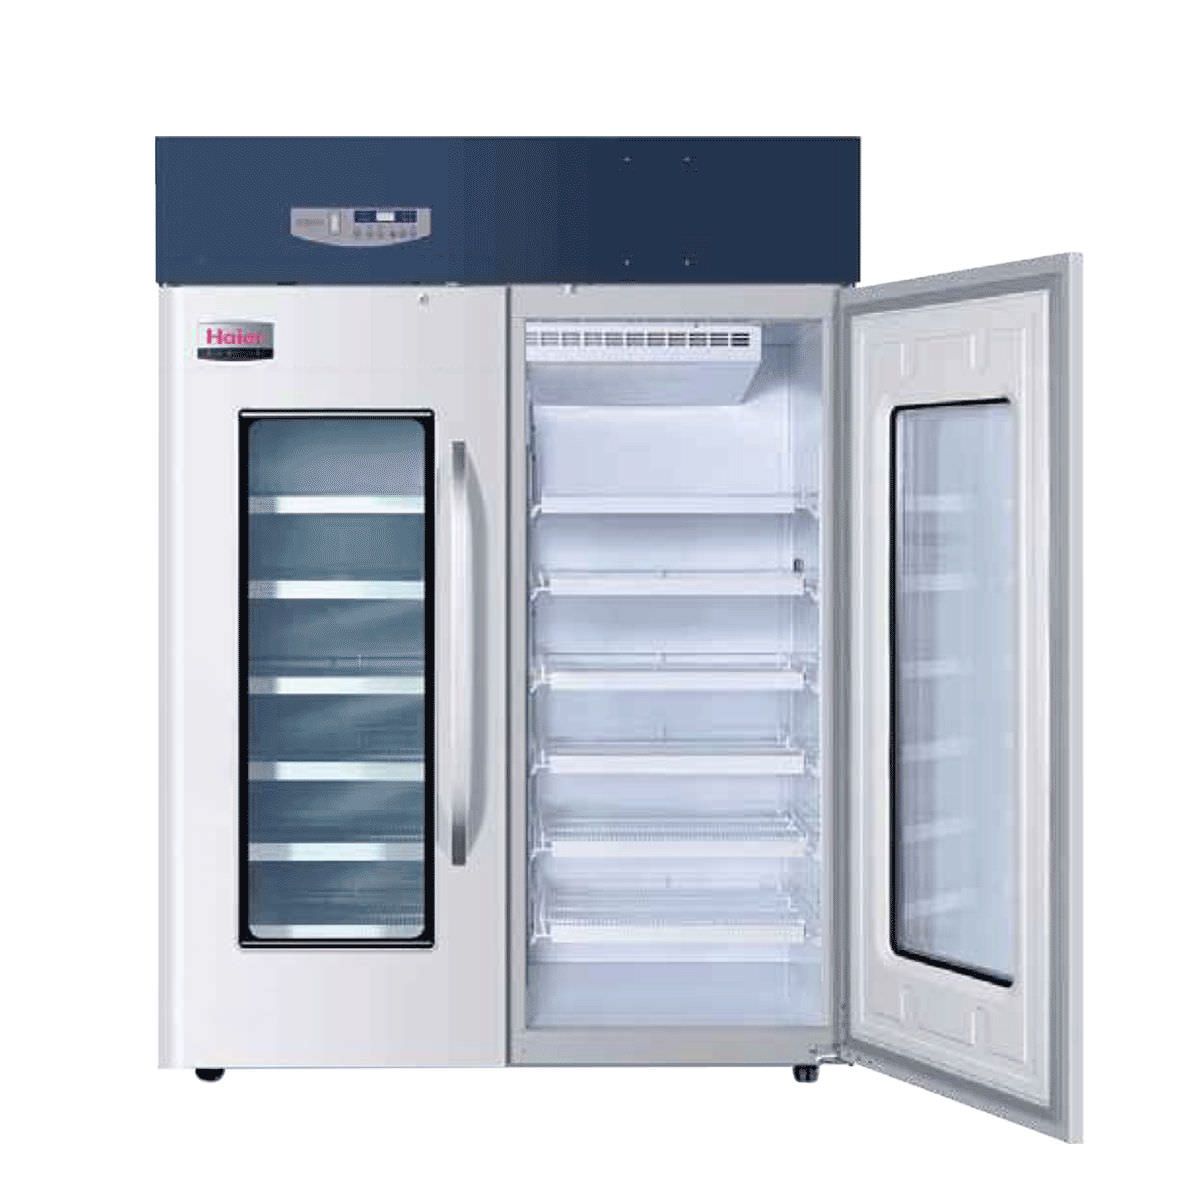 Pharmacy refrigerator / cabinet / 2-door 2 °C ... 8 °C, 1378 L | HYC-1378 Haier Medical and Laboratory Products